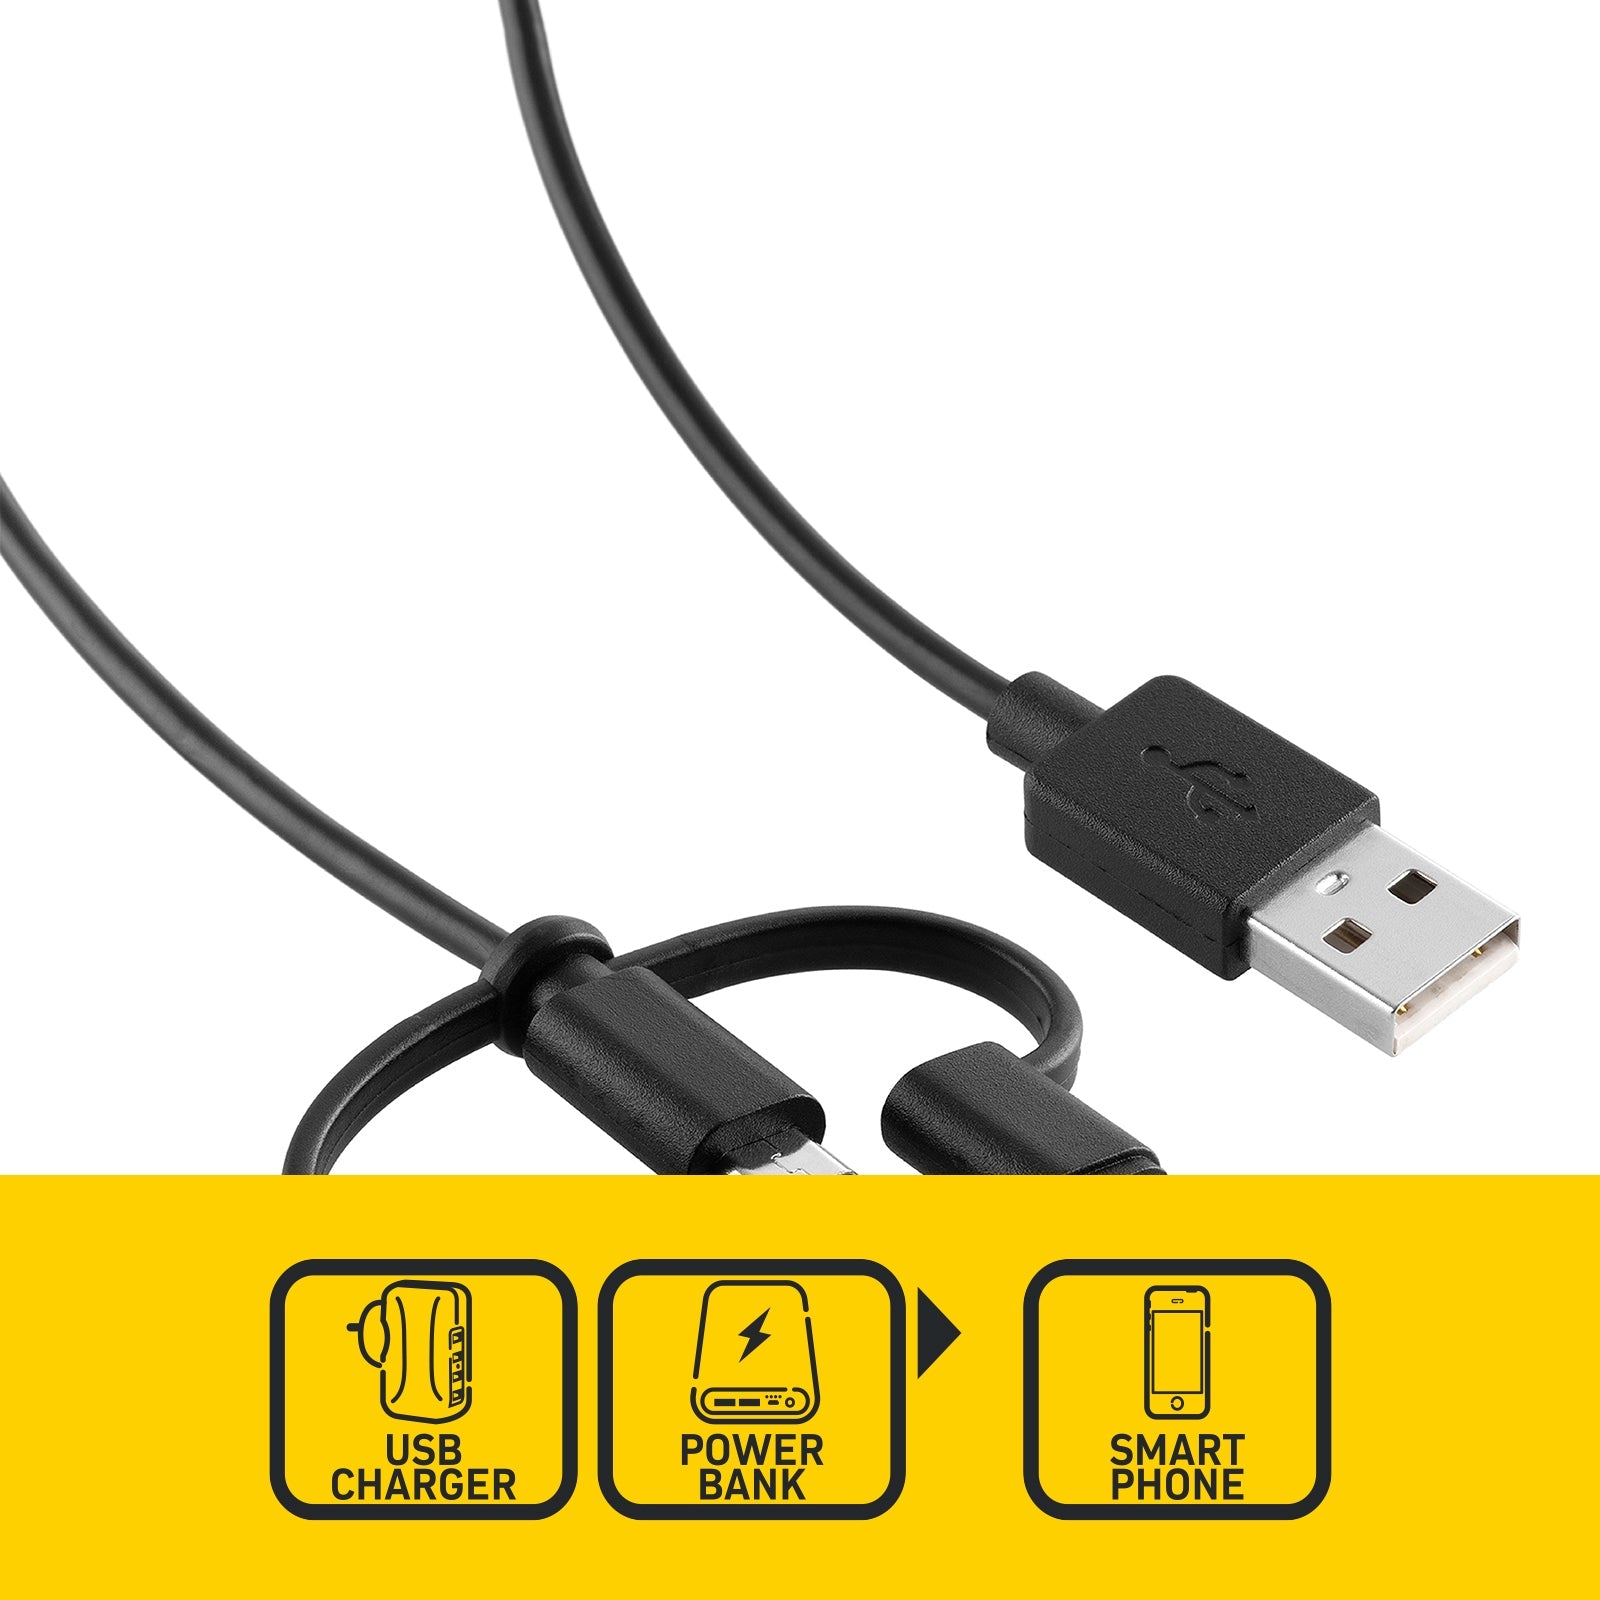 Pgytech USB Type-A To Lightning Cable (13.8-inch)